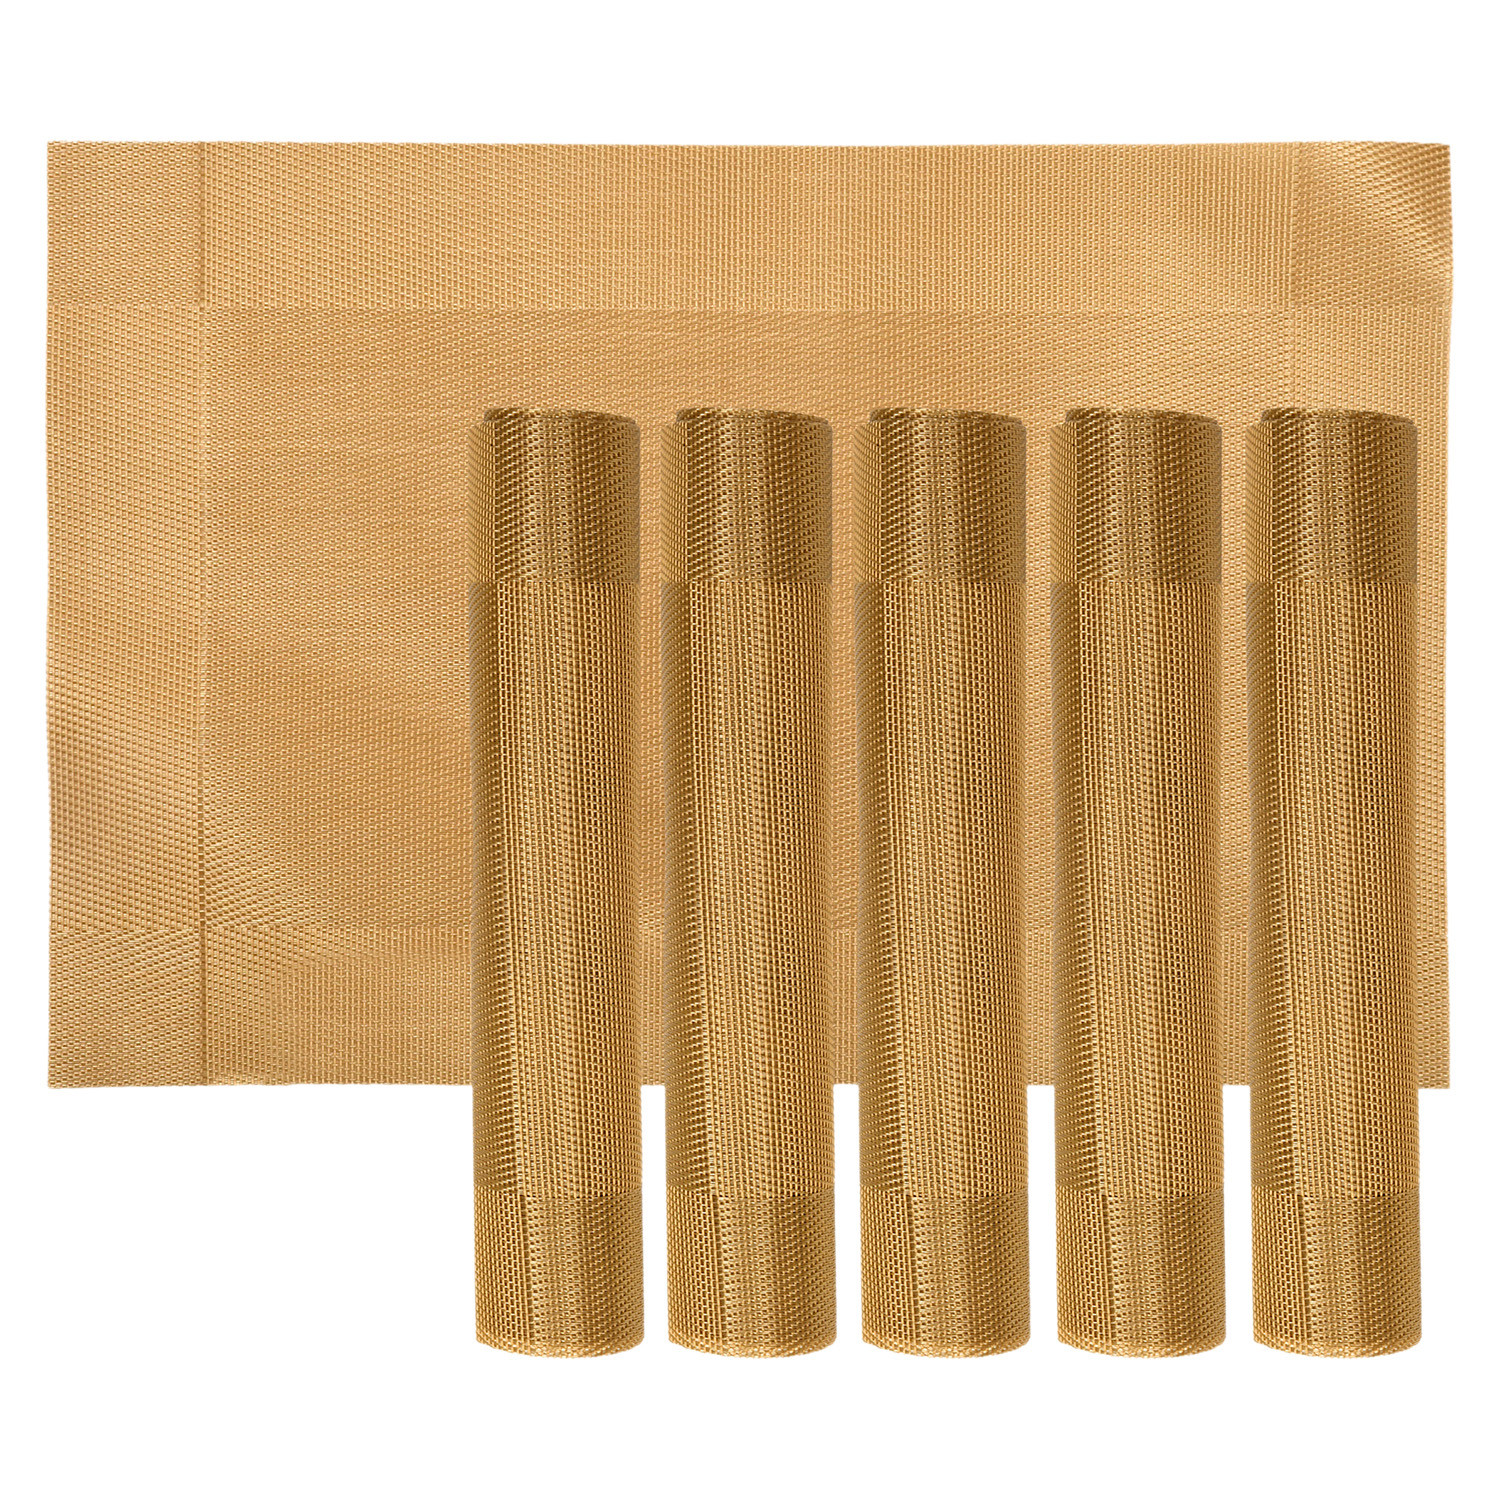 Kuber Industries Reversible Non-Slip Wipe Clean Heat Resistant PVC Placemats for Dining Table,(Gold)